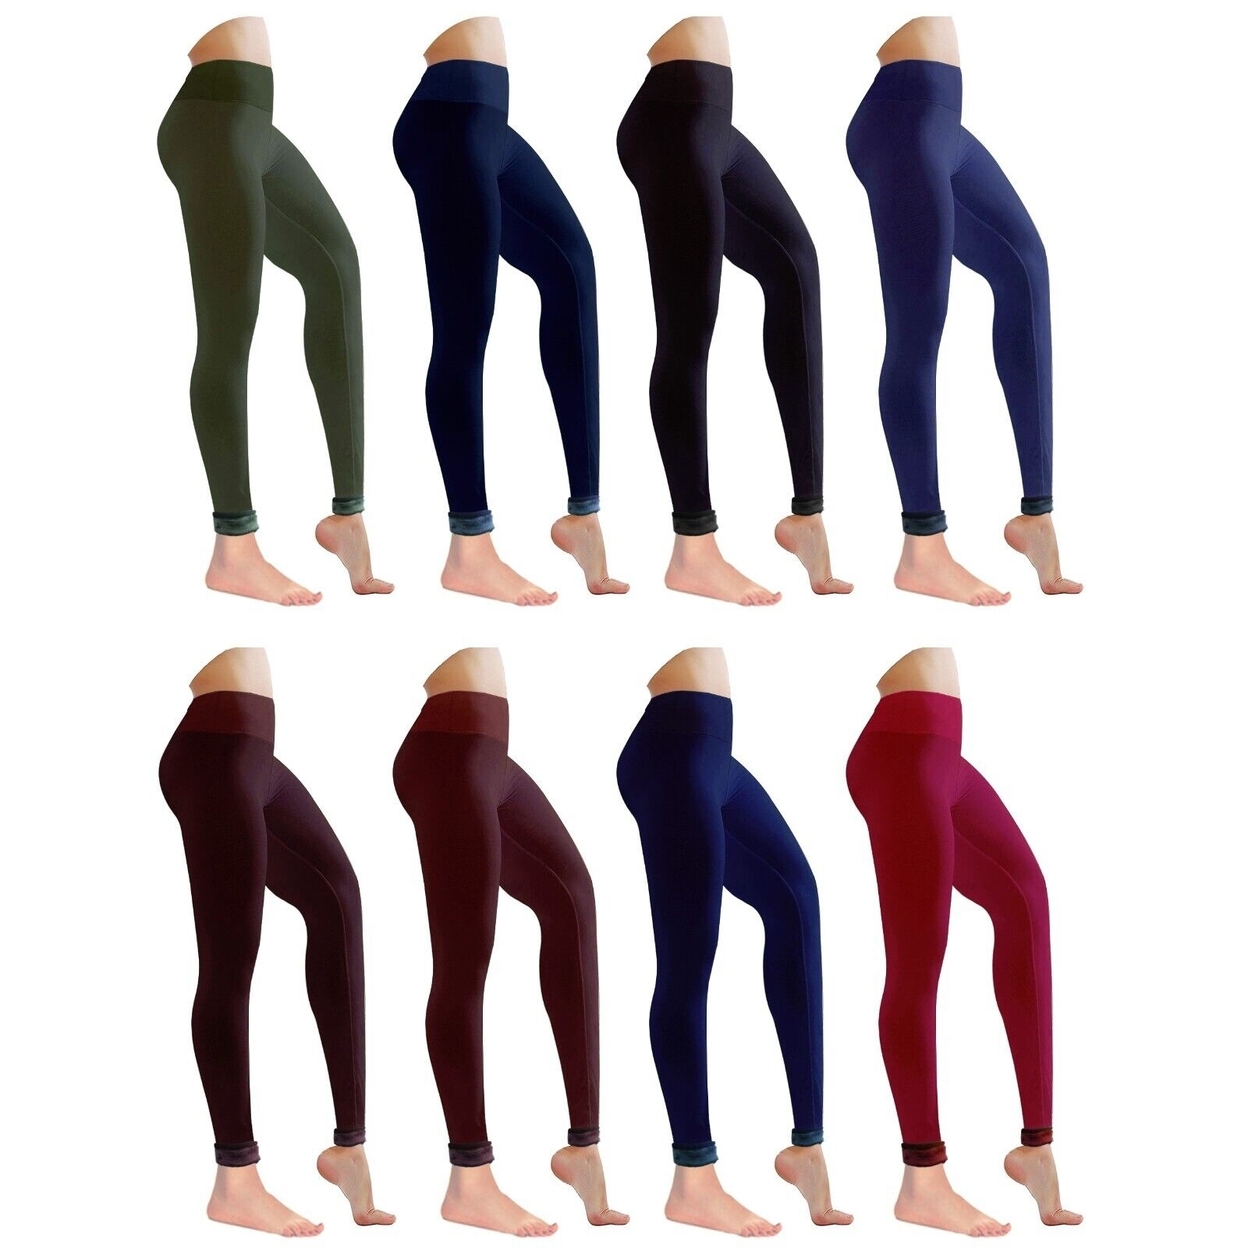 3-Pack: Women's Winter Warm Ultra Soft Cozy Fur Lined Leggings - Assorted, Large